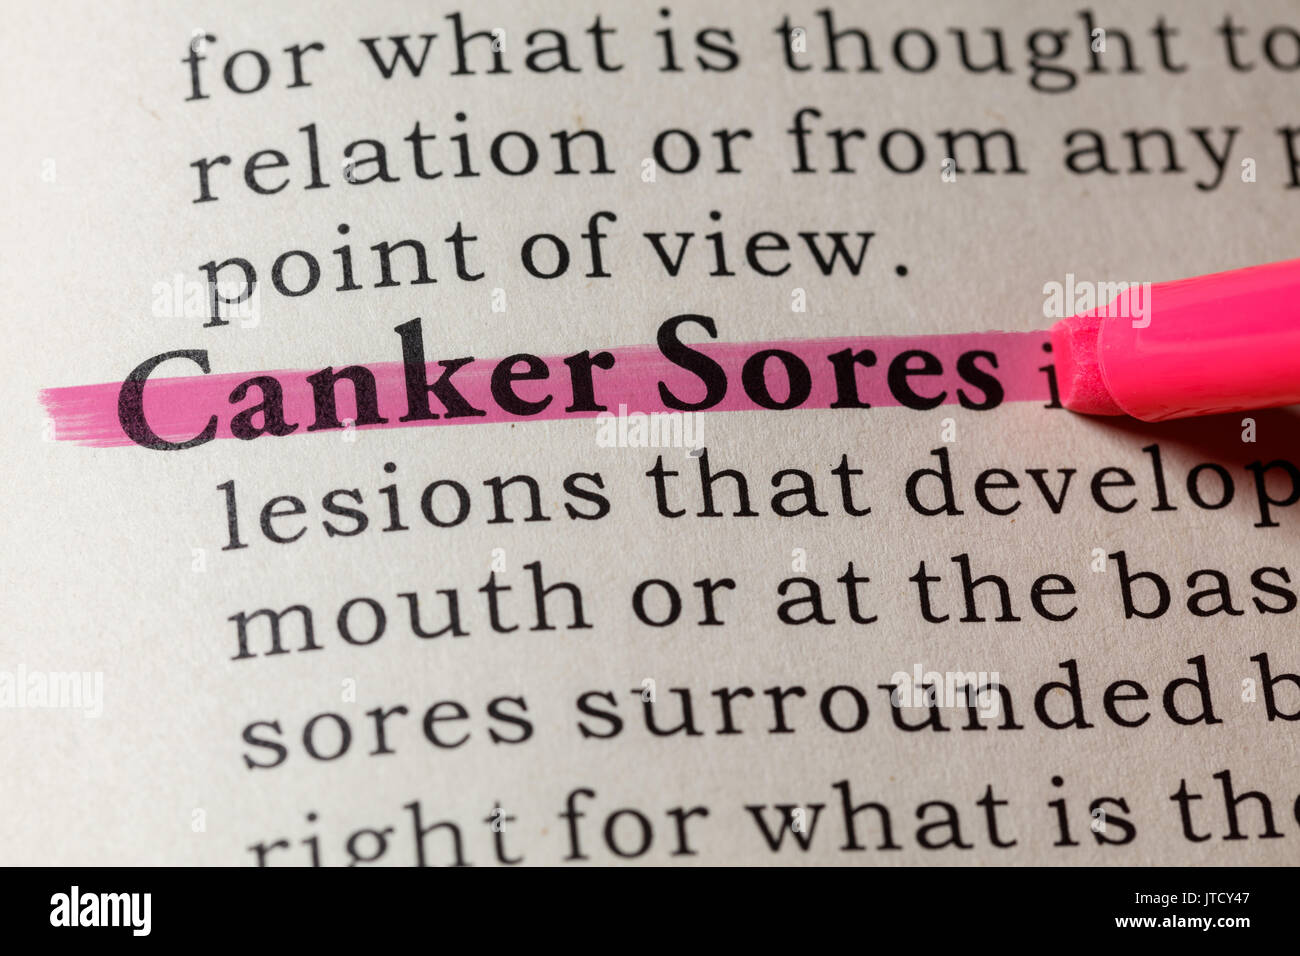 Fake Dictionary, Dictionary definition of the word Canker Sores. including key descriptive words. Stock Photo